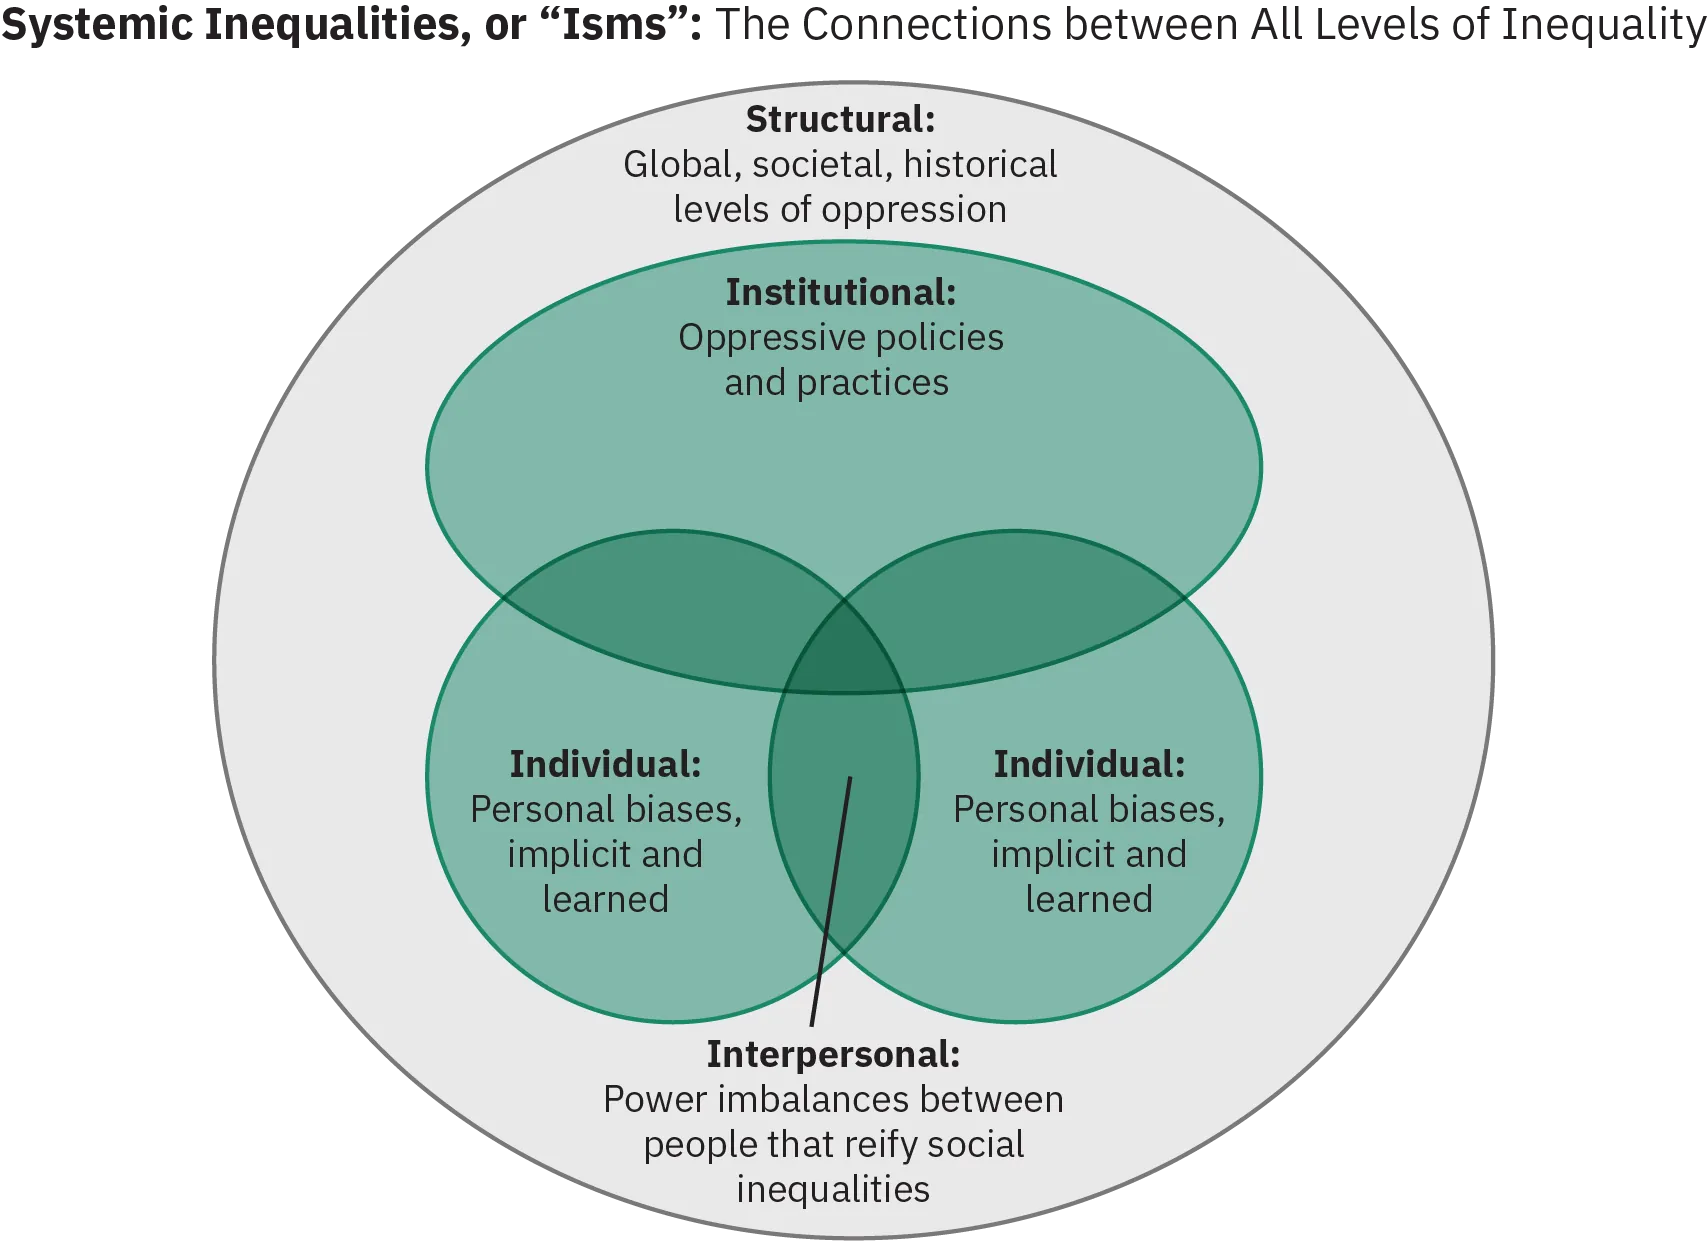 Diagram consisting of the following elements: 1) Two interior, overlapping circles, each labelled “Individual” and containing the text “personal biases/implicit and learned”; 2) The space where the two “Individual” circles overlap, labeled “Interpersonal” and containing the text “Power imbalances between people that reify social inequalities”; 3) An oval partially overlapping the Individual circles labelled “Institutional” and containing the text “Oppressive policies and practices”; 4) A circle encompassing all other elements and labelled with the text “Structural: Global, societal, historical levels of oppression”; 5) A label above the large circle reading “Systemic Inequalities: Systemic “isms” - the connection between all levels of inequality.”